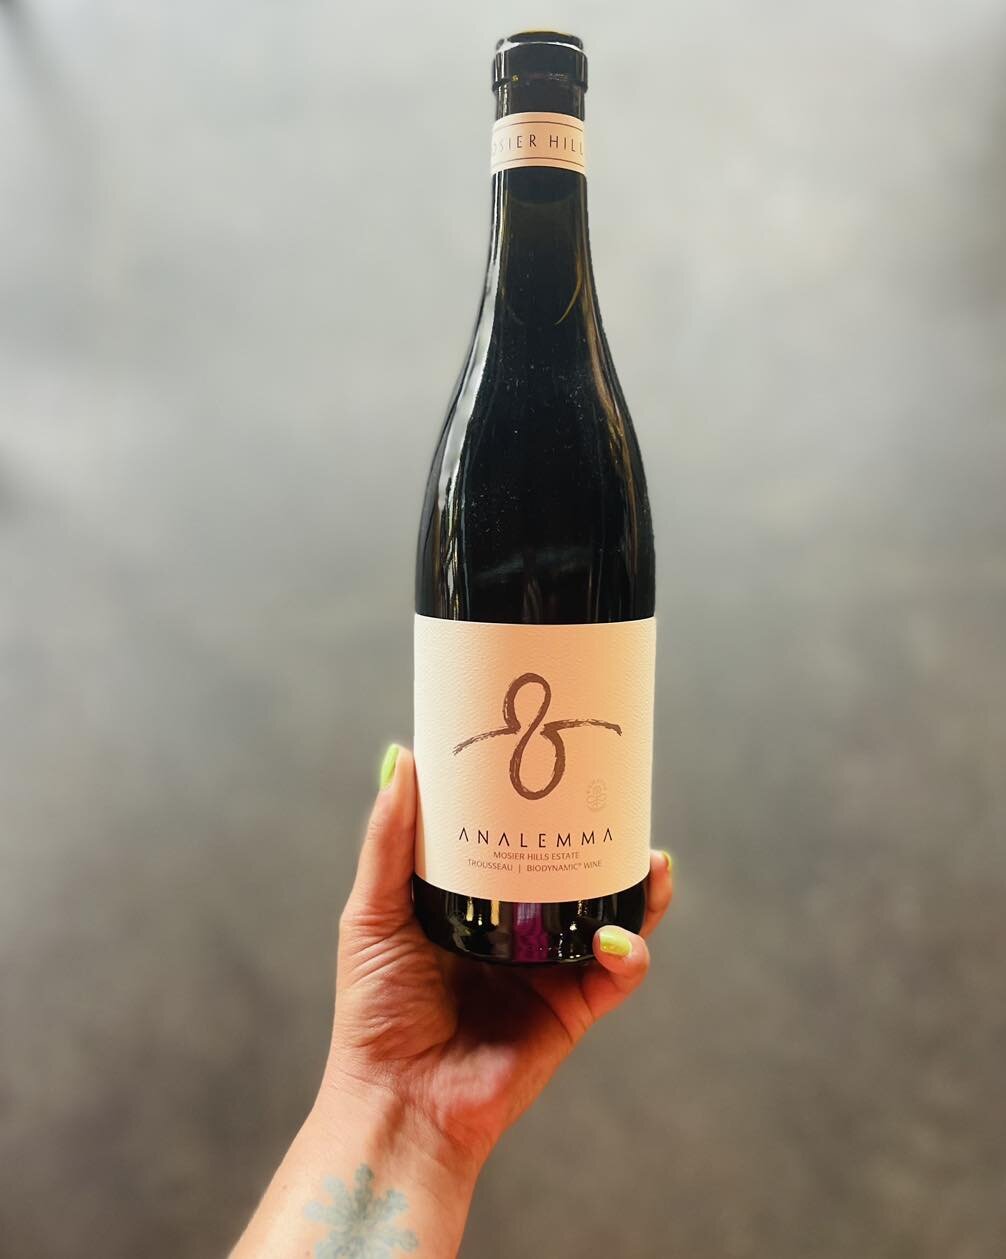 Our wine pick for the weekend is our Trousseau, both certified biodynamic in the vineyard AND the cellar!

Mosier grower and producer Analemma Wines made this Galician inspired light bodied red wine from estate fruit which showcases beautiful strawbe